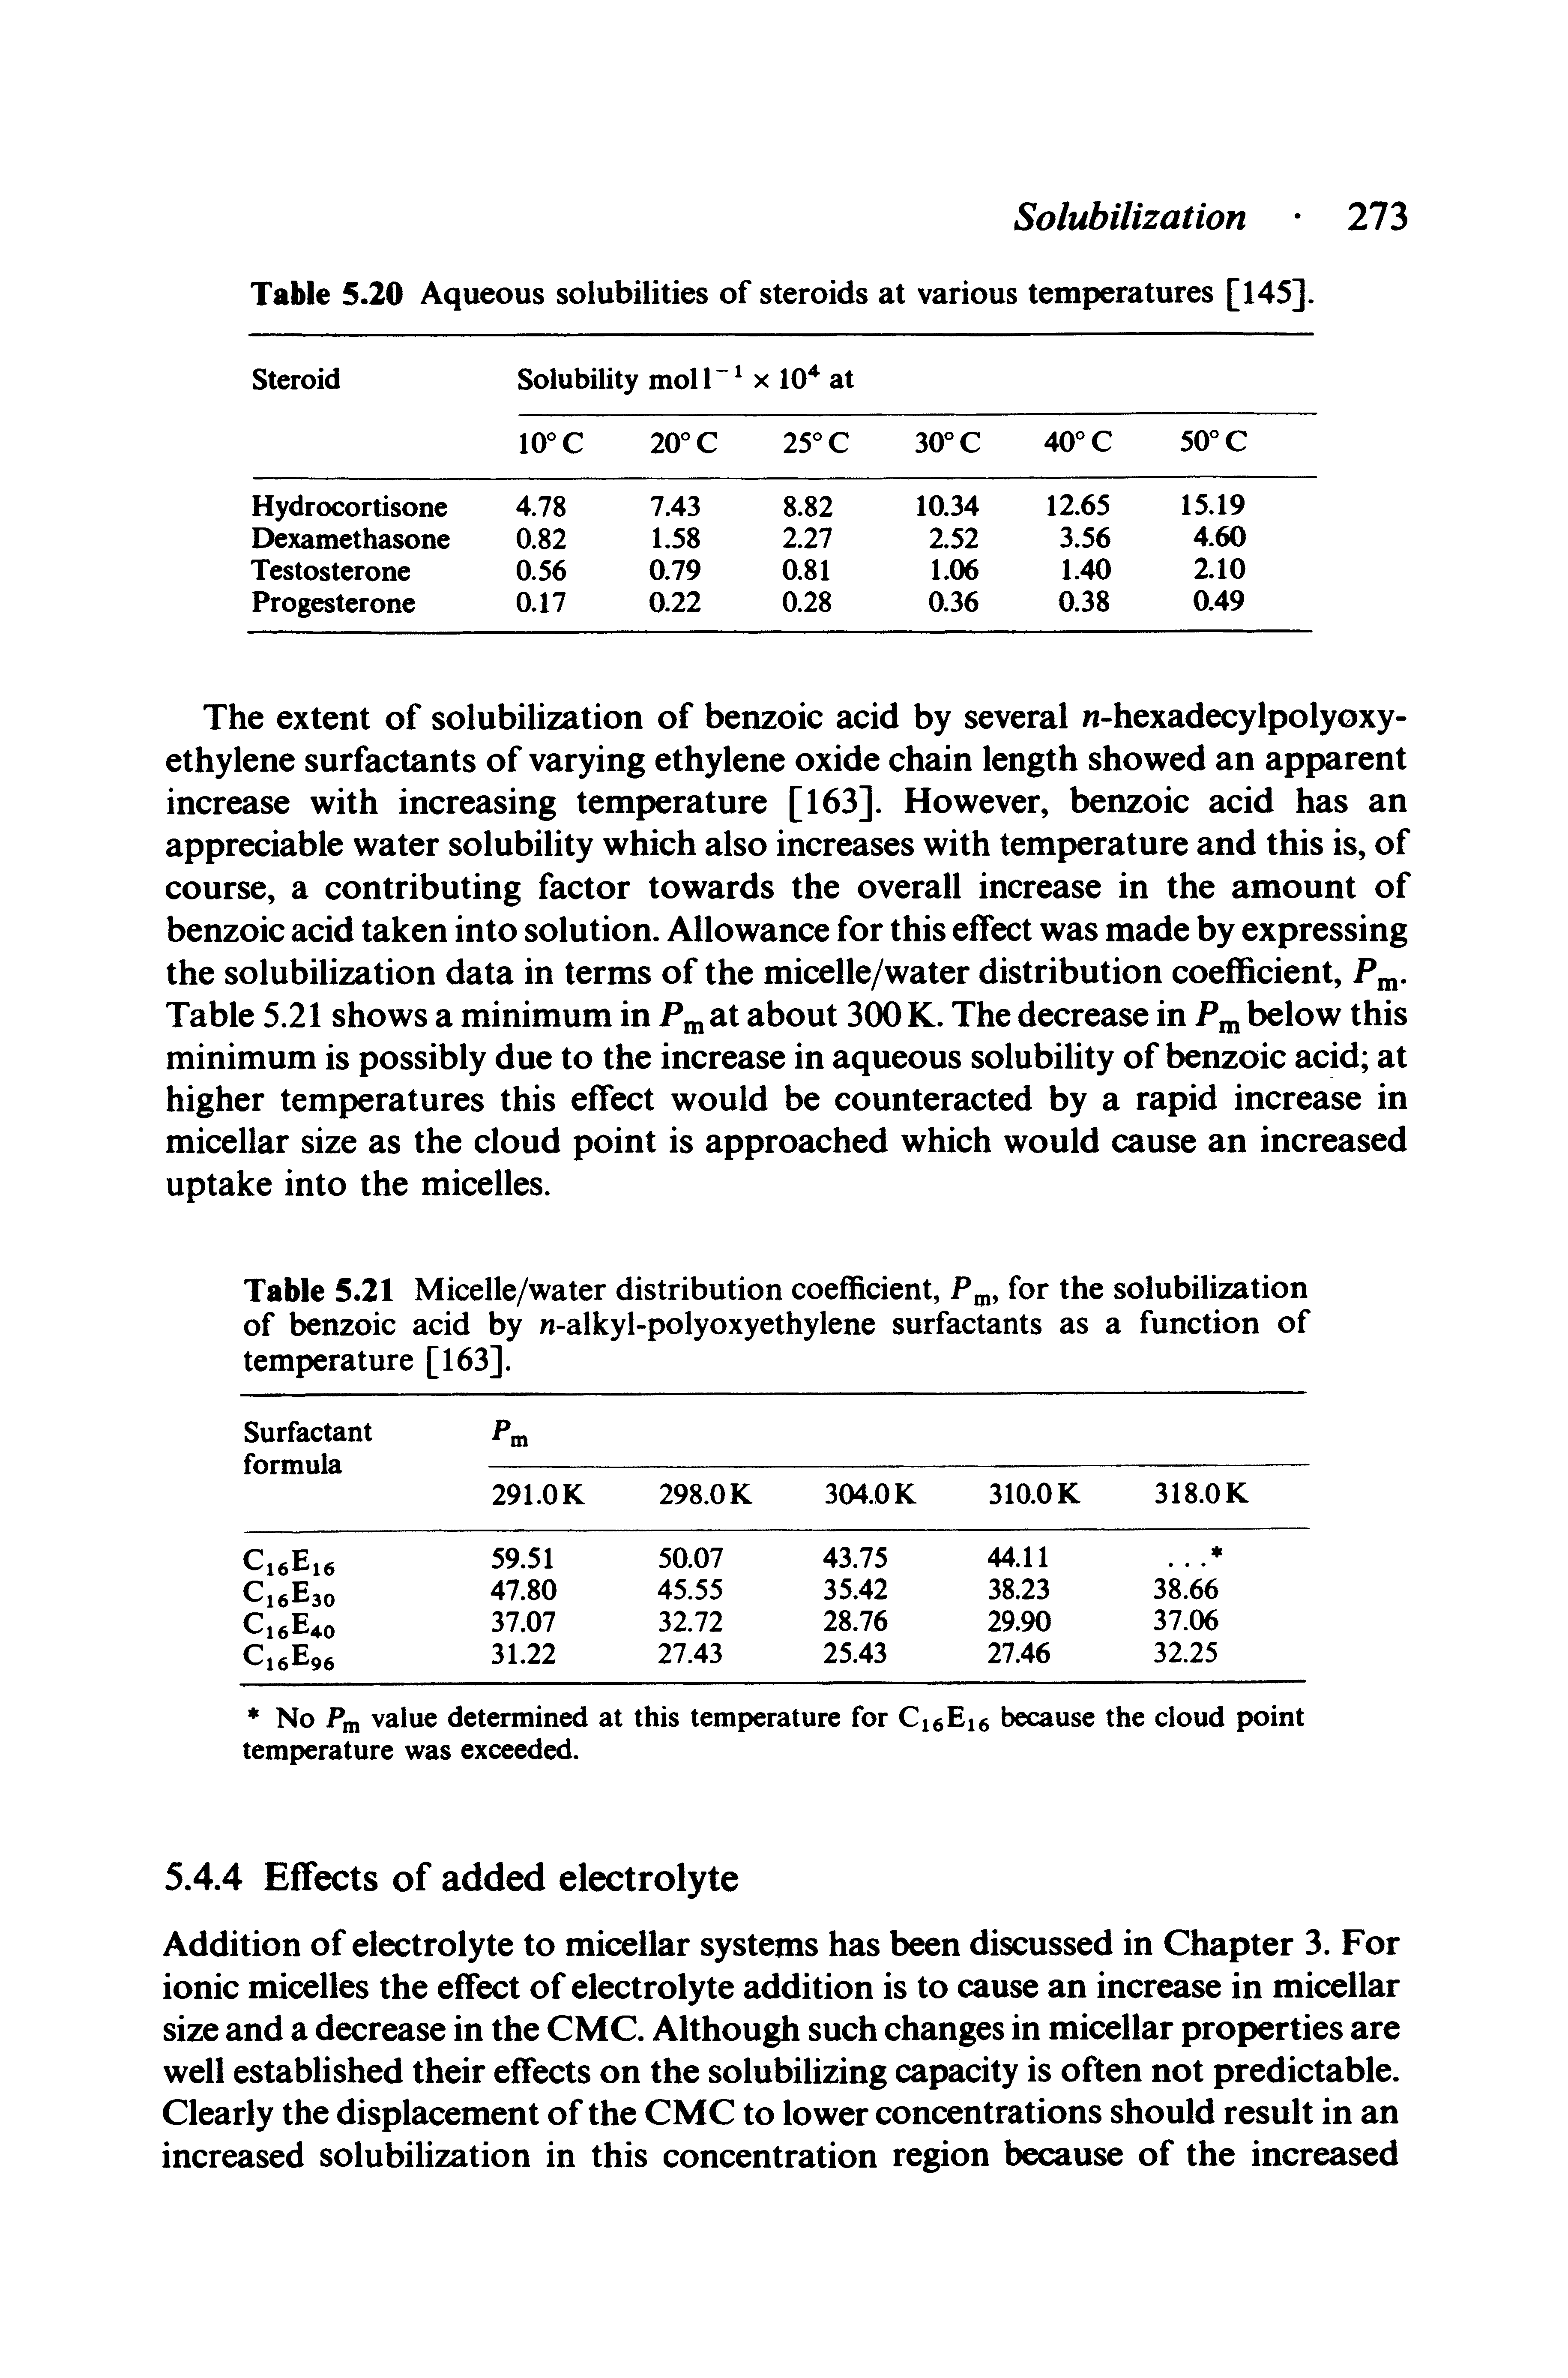 Table 5.21 Micelle/water distribution coefficient, P, , for the solubilization of benzoic acid by n-alkyl-polyoxyethylene surfactants as a function of temperature [163].